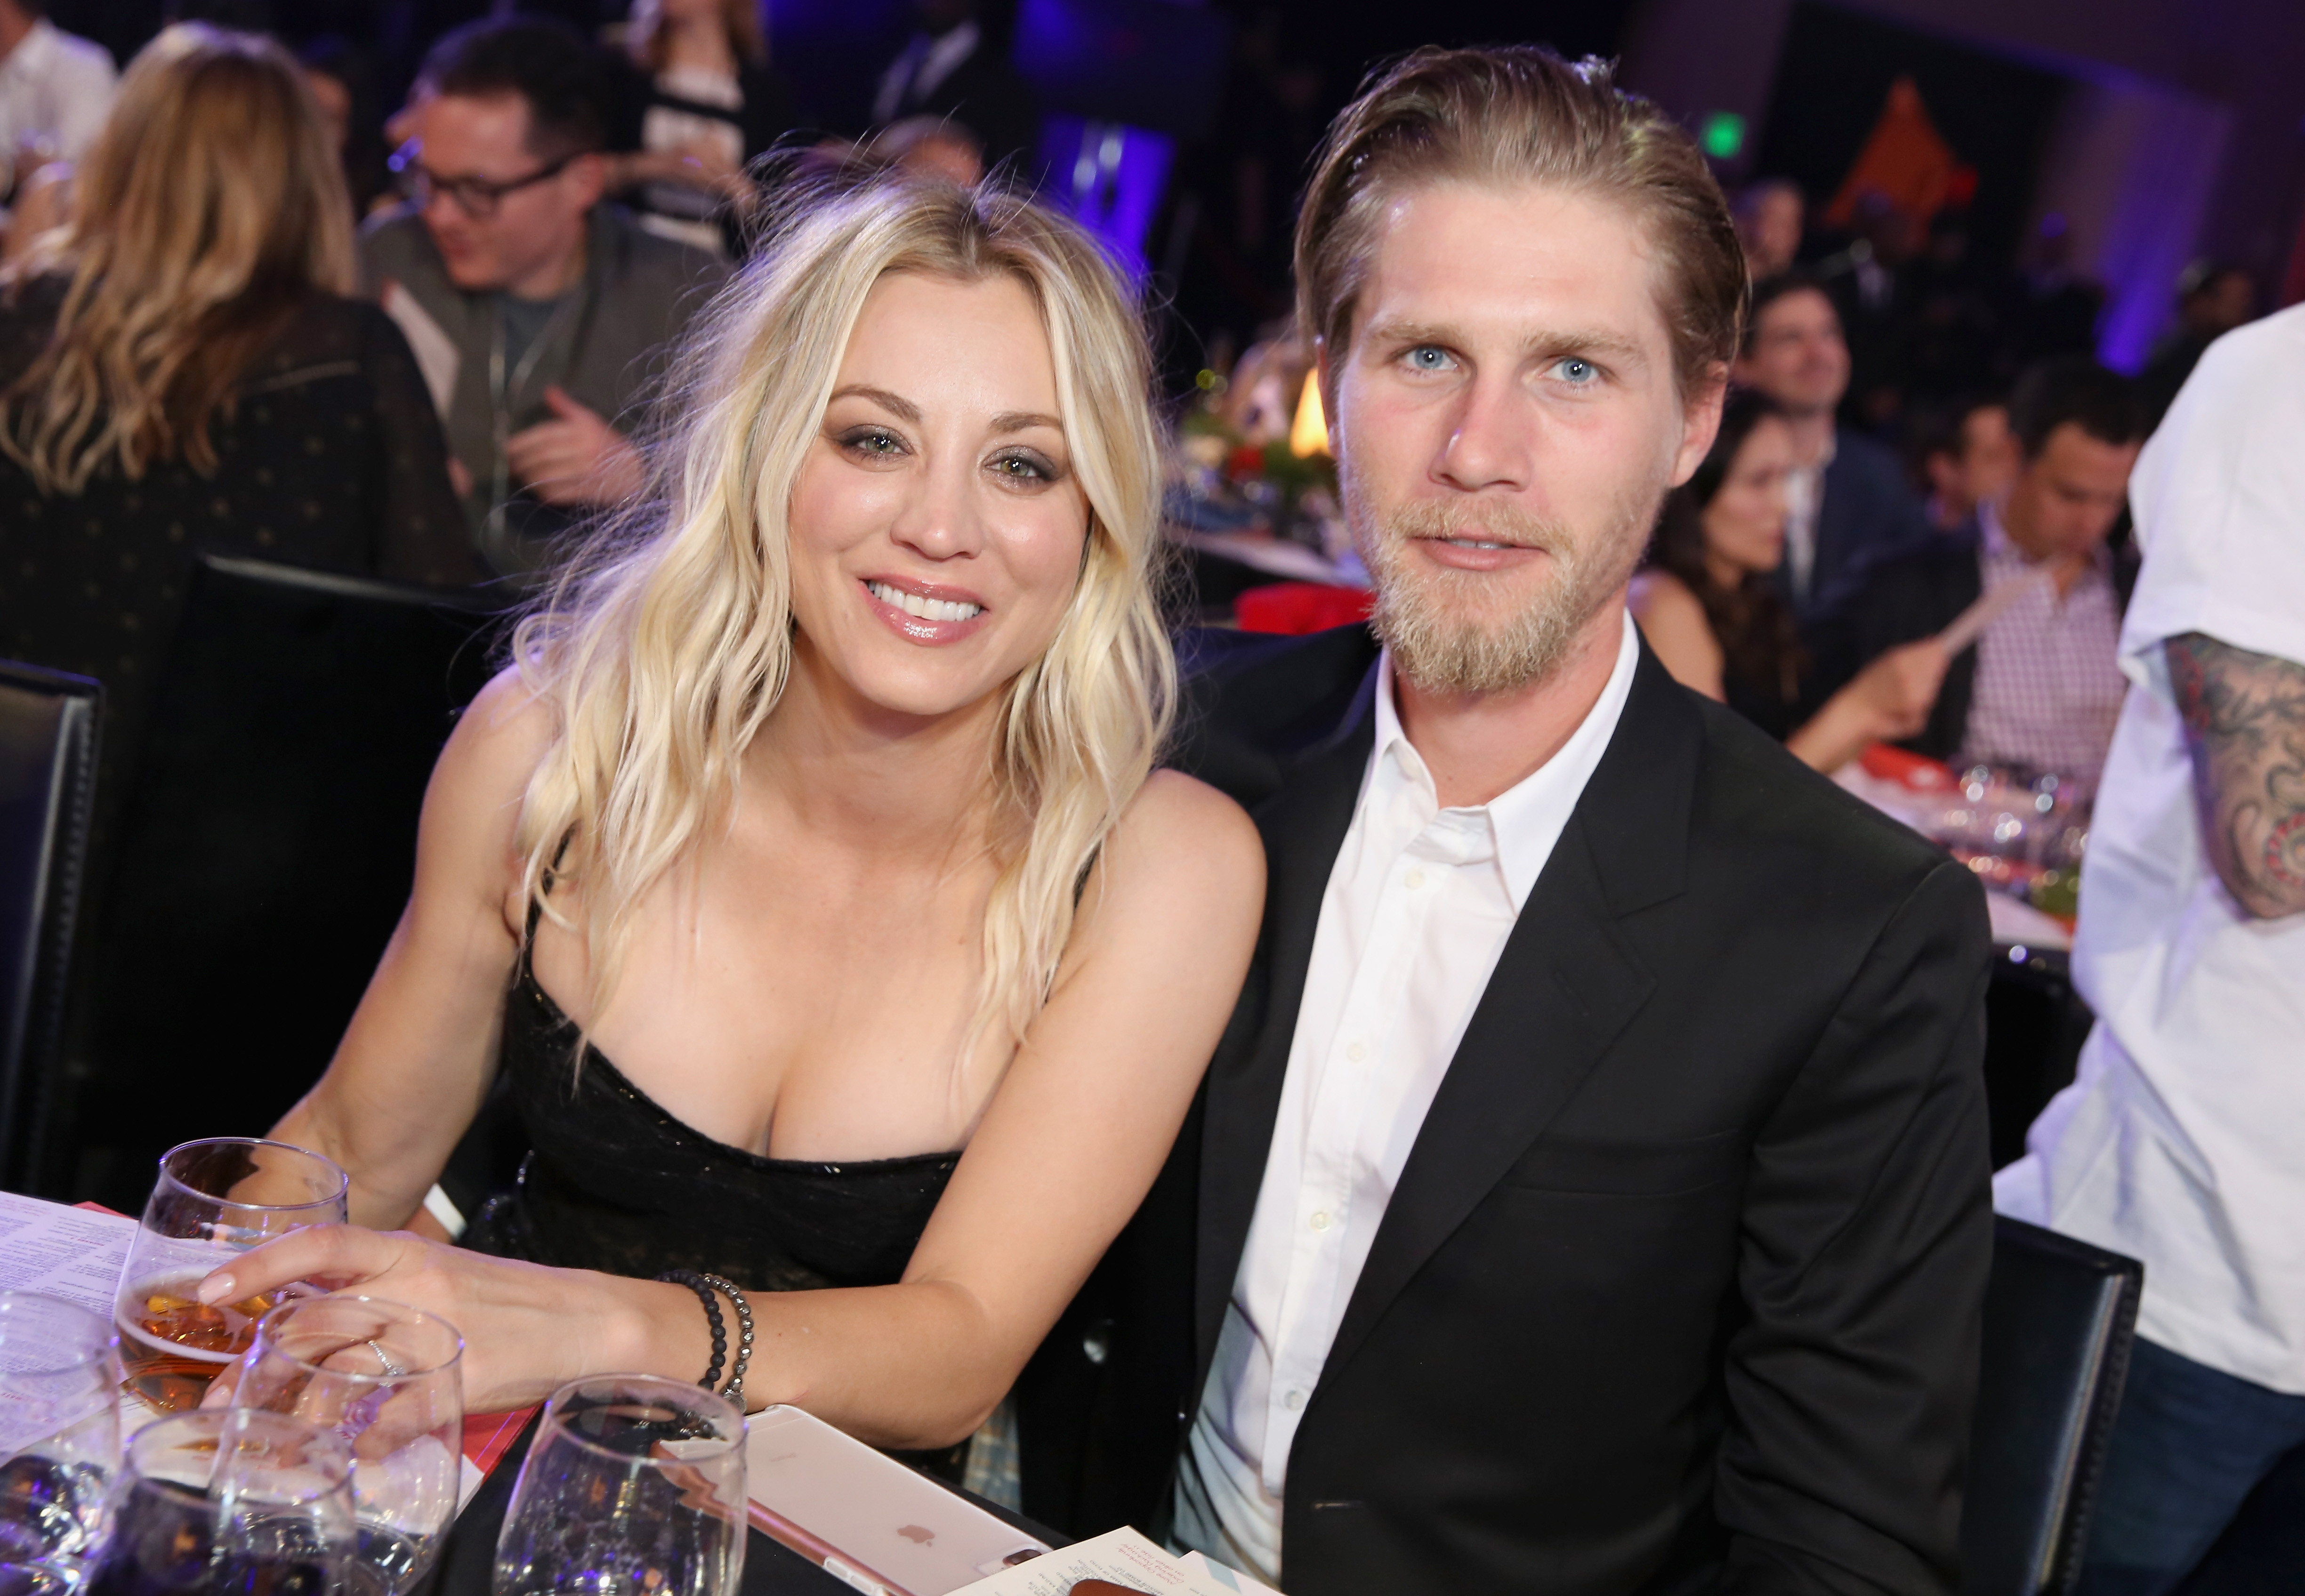 Kaley Cuoco and Karl Cook in Los Angeles in 2018 | Source: Getty Images